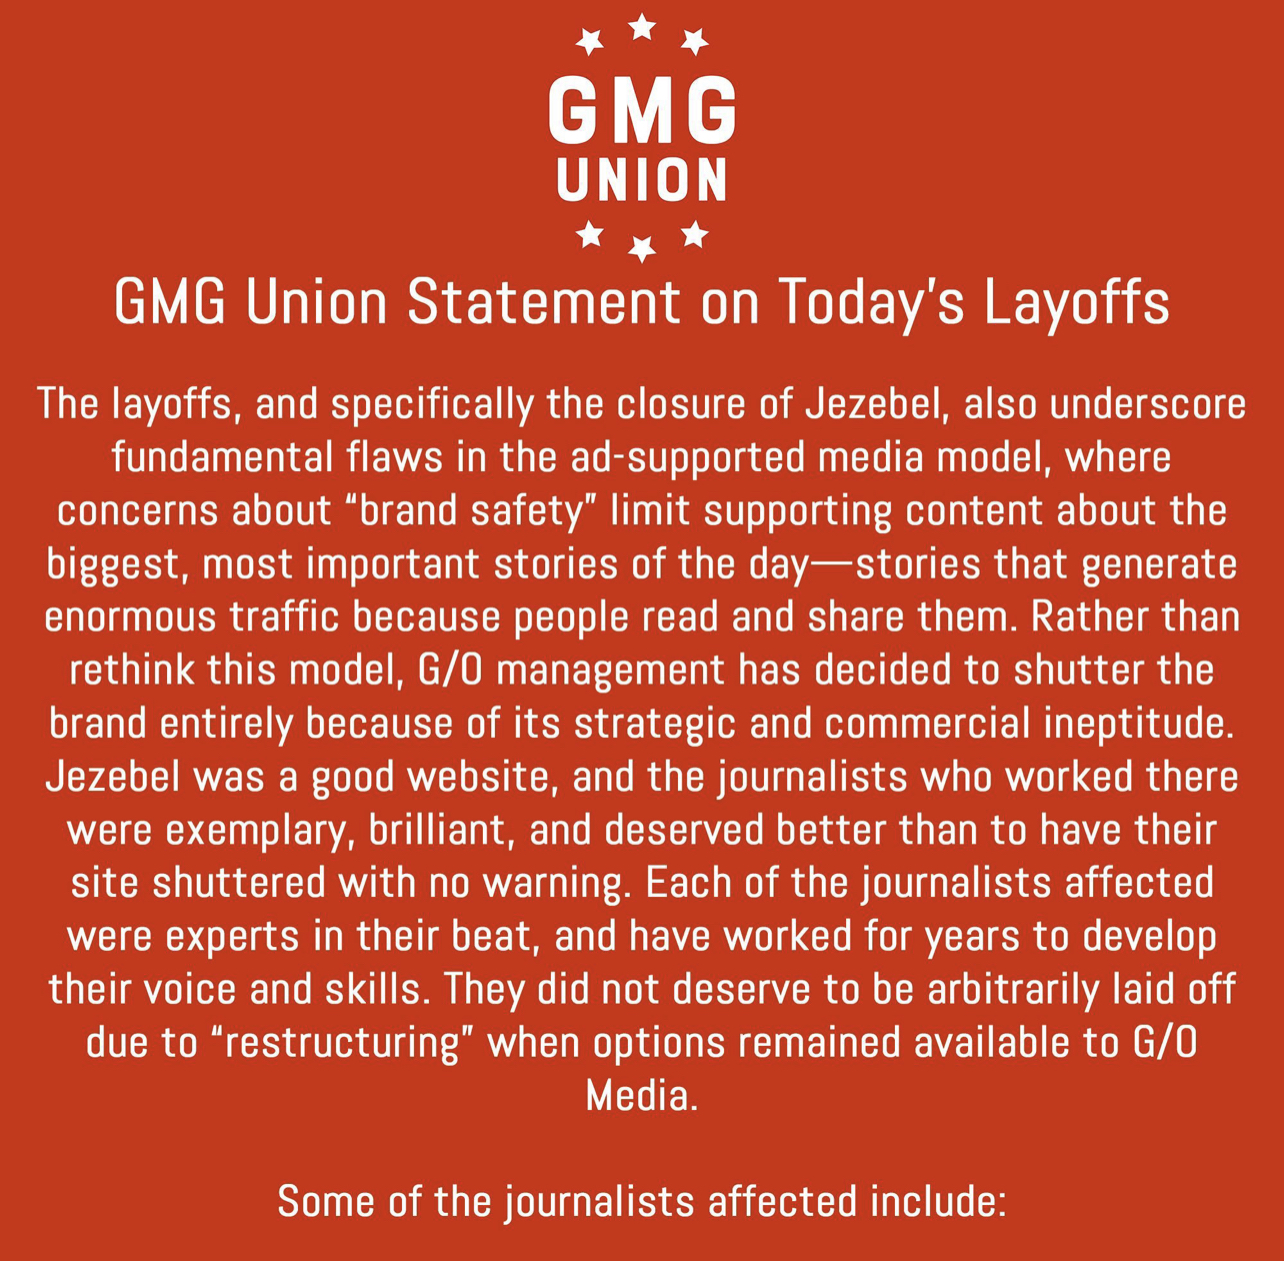 GMG Union Statement on Today's Layoffs The layoffs, and specifically the closure of Jezebel, also underscore fundamental flaws in the ad-supported media model, where concerns about brand safety limit supporting content about the biggest, most important stories of the day stories that generate enormous traffic because people read and share them. Rather than rethink this model, G/0 management has decided to shutter the brand entirely because of its strategic and commercial ineptitude. Jezebel was a good website, and the journalists who worked there were exemplary, brilliant, and deserved better than to have their site shuttered with no warning. Each of the journalists affected were experts in their beat, and have worked for years to develop their voice and skills. They did not deserve to be arbitrarily laid off due to restructuring when options remained available to G/0 Media. Some of the journalists affected include: